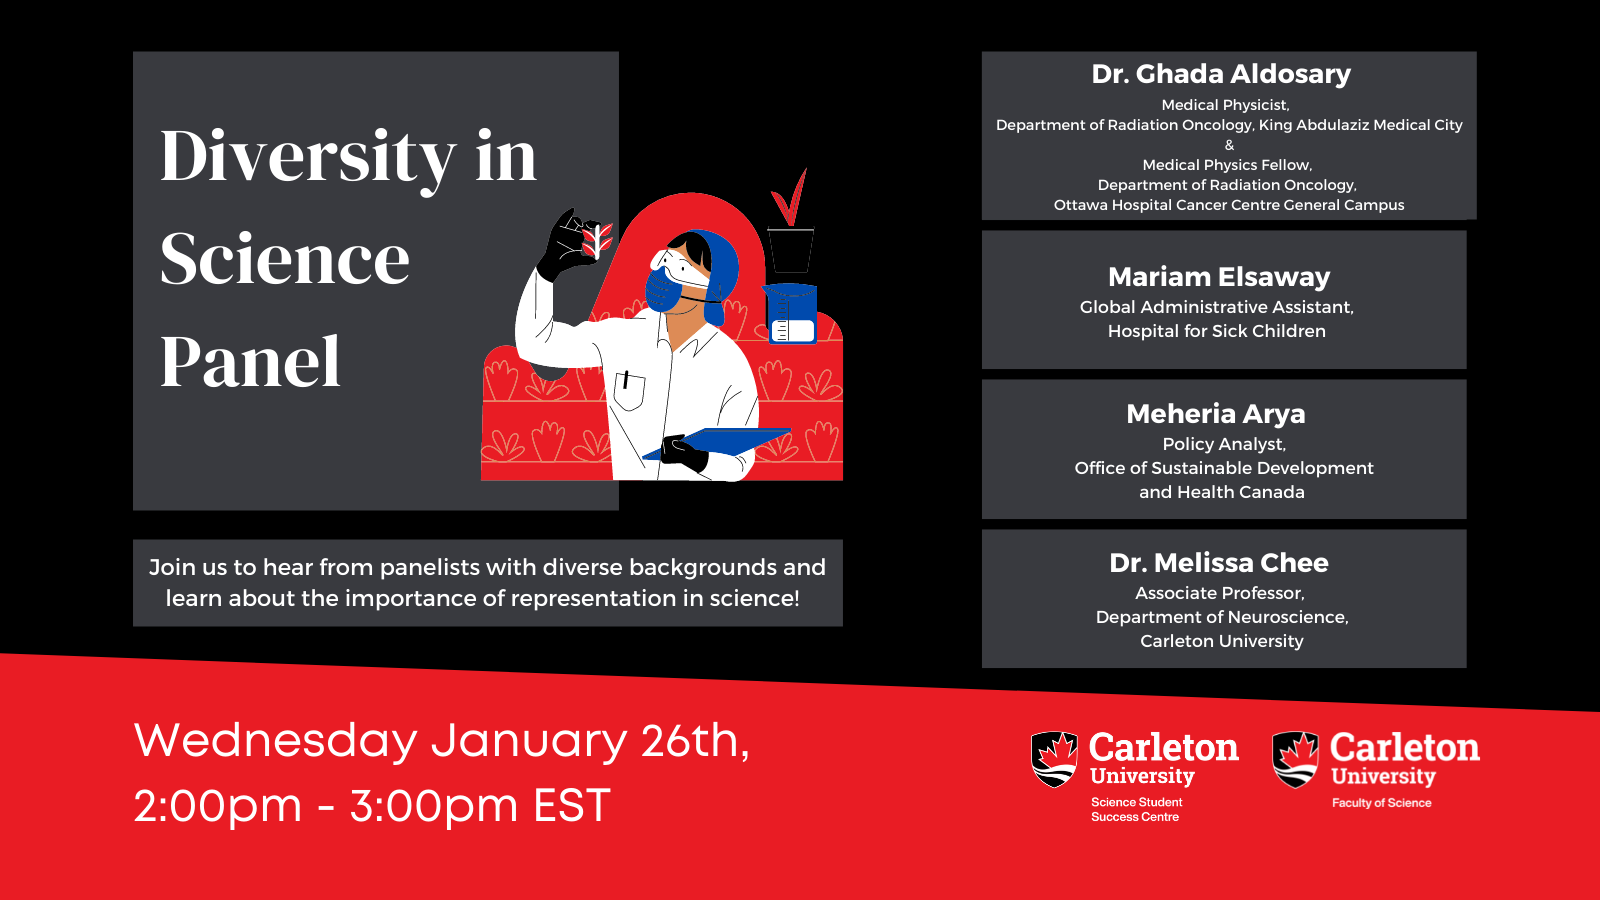 Poster with Text. The text reads "Diversity in Science Panel. Join us to hear from panelists with diverse backgrounds and learn about the importance of representation in science! Dr. Ghada Aldosary, Medical Physicist, Department of Radiation Oncology, King Abdulaziz Medical City & Medical Physics Fellow,  Department of Radiation Oncology,  Ottawa Hospital Cancer Centre General Campus. Mariam Elsaway, Global Administrative Assistant, Hospital for Sick Children Meheria Arya, Policy Analyst, Office of Sustainable Development and Health Canada Dr. Melissa Chee, Associate Professor, Department of Neuroscience, Carleton University Wednesday, January 26th, 2:00pm - 3:00pm EST. Carleton University, Science Student Success Centre. Carleton University, Faculty of Science